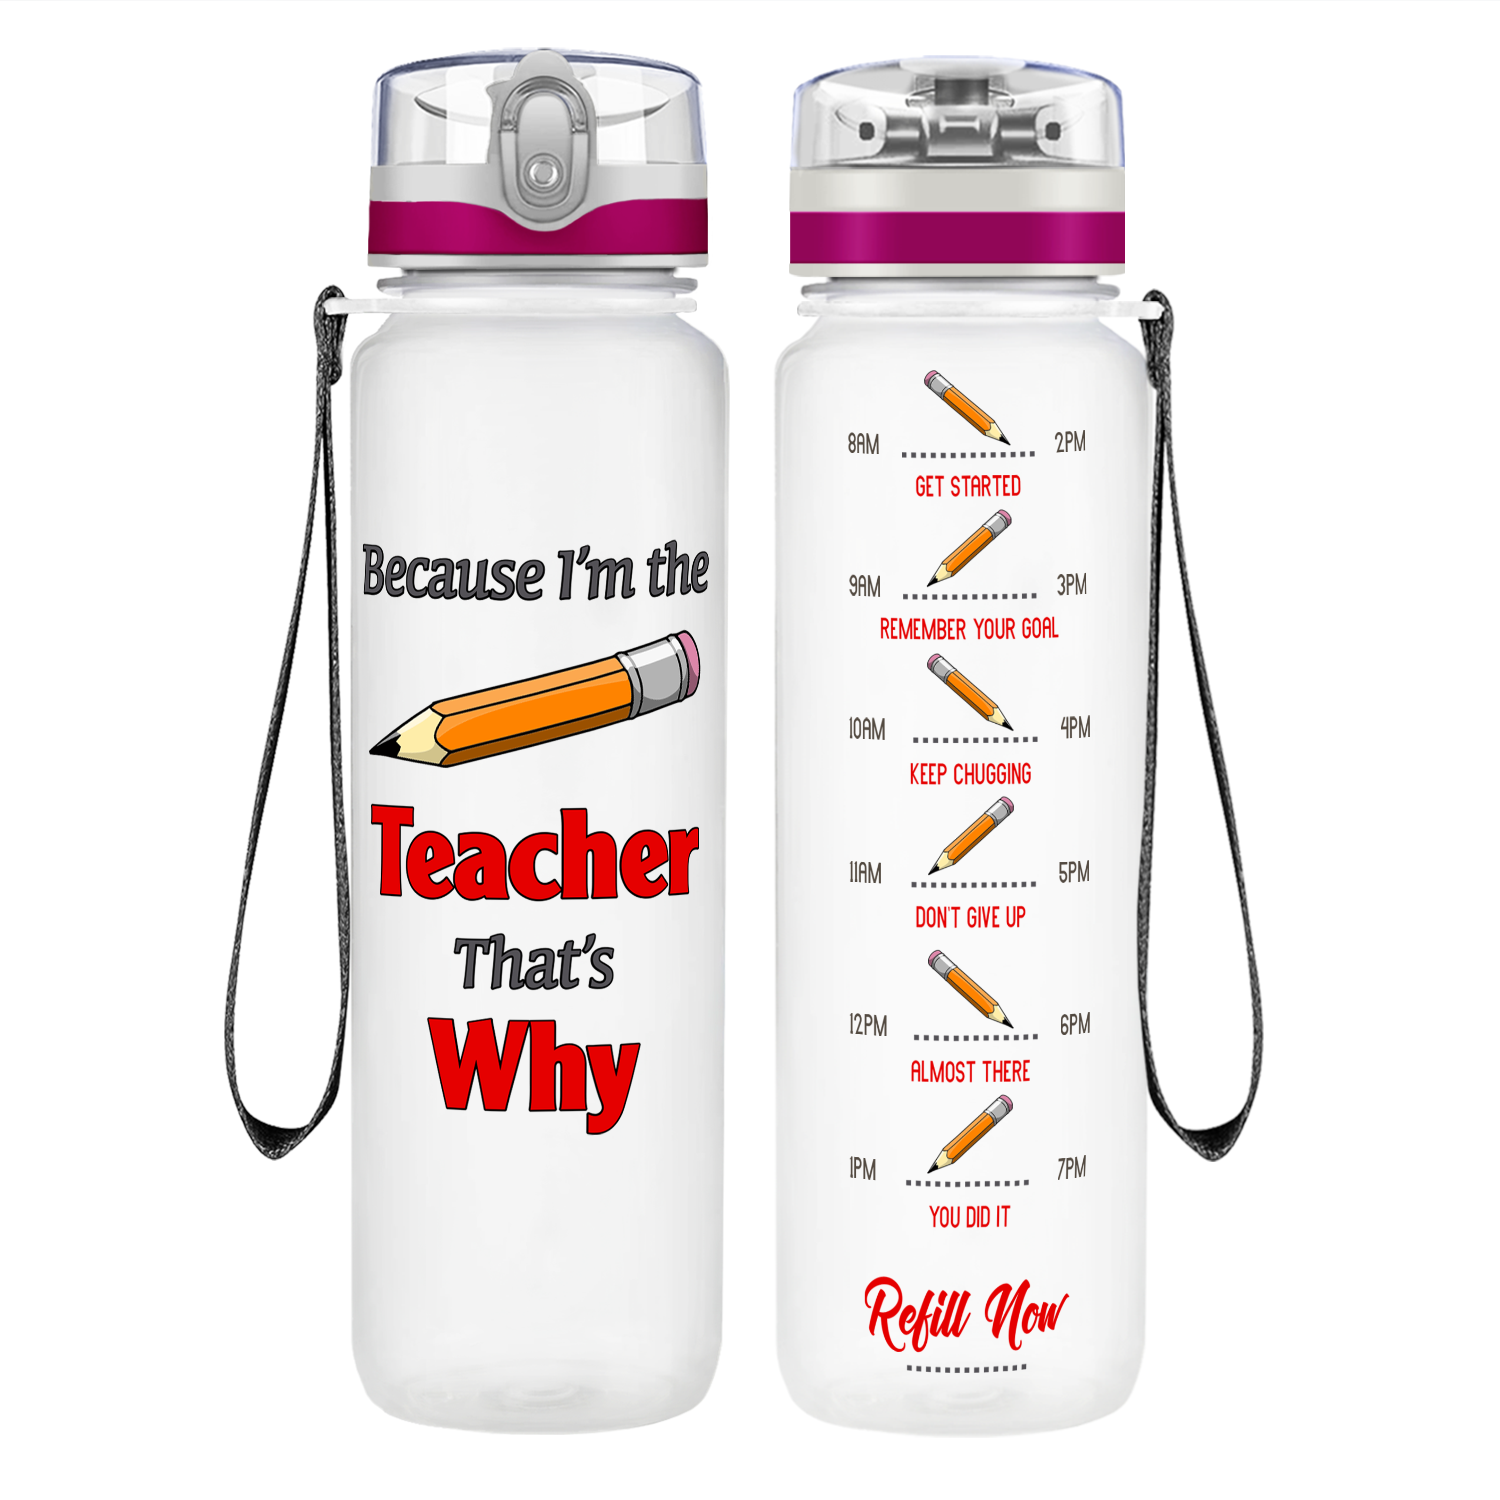 Because Im The Teacher on 32 oz Motivational Tracking Water Bottle